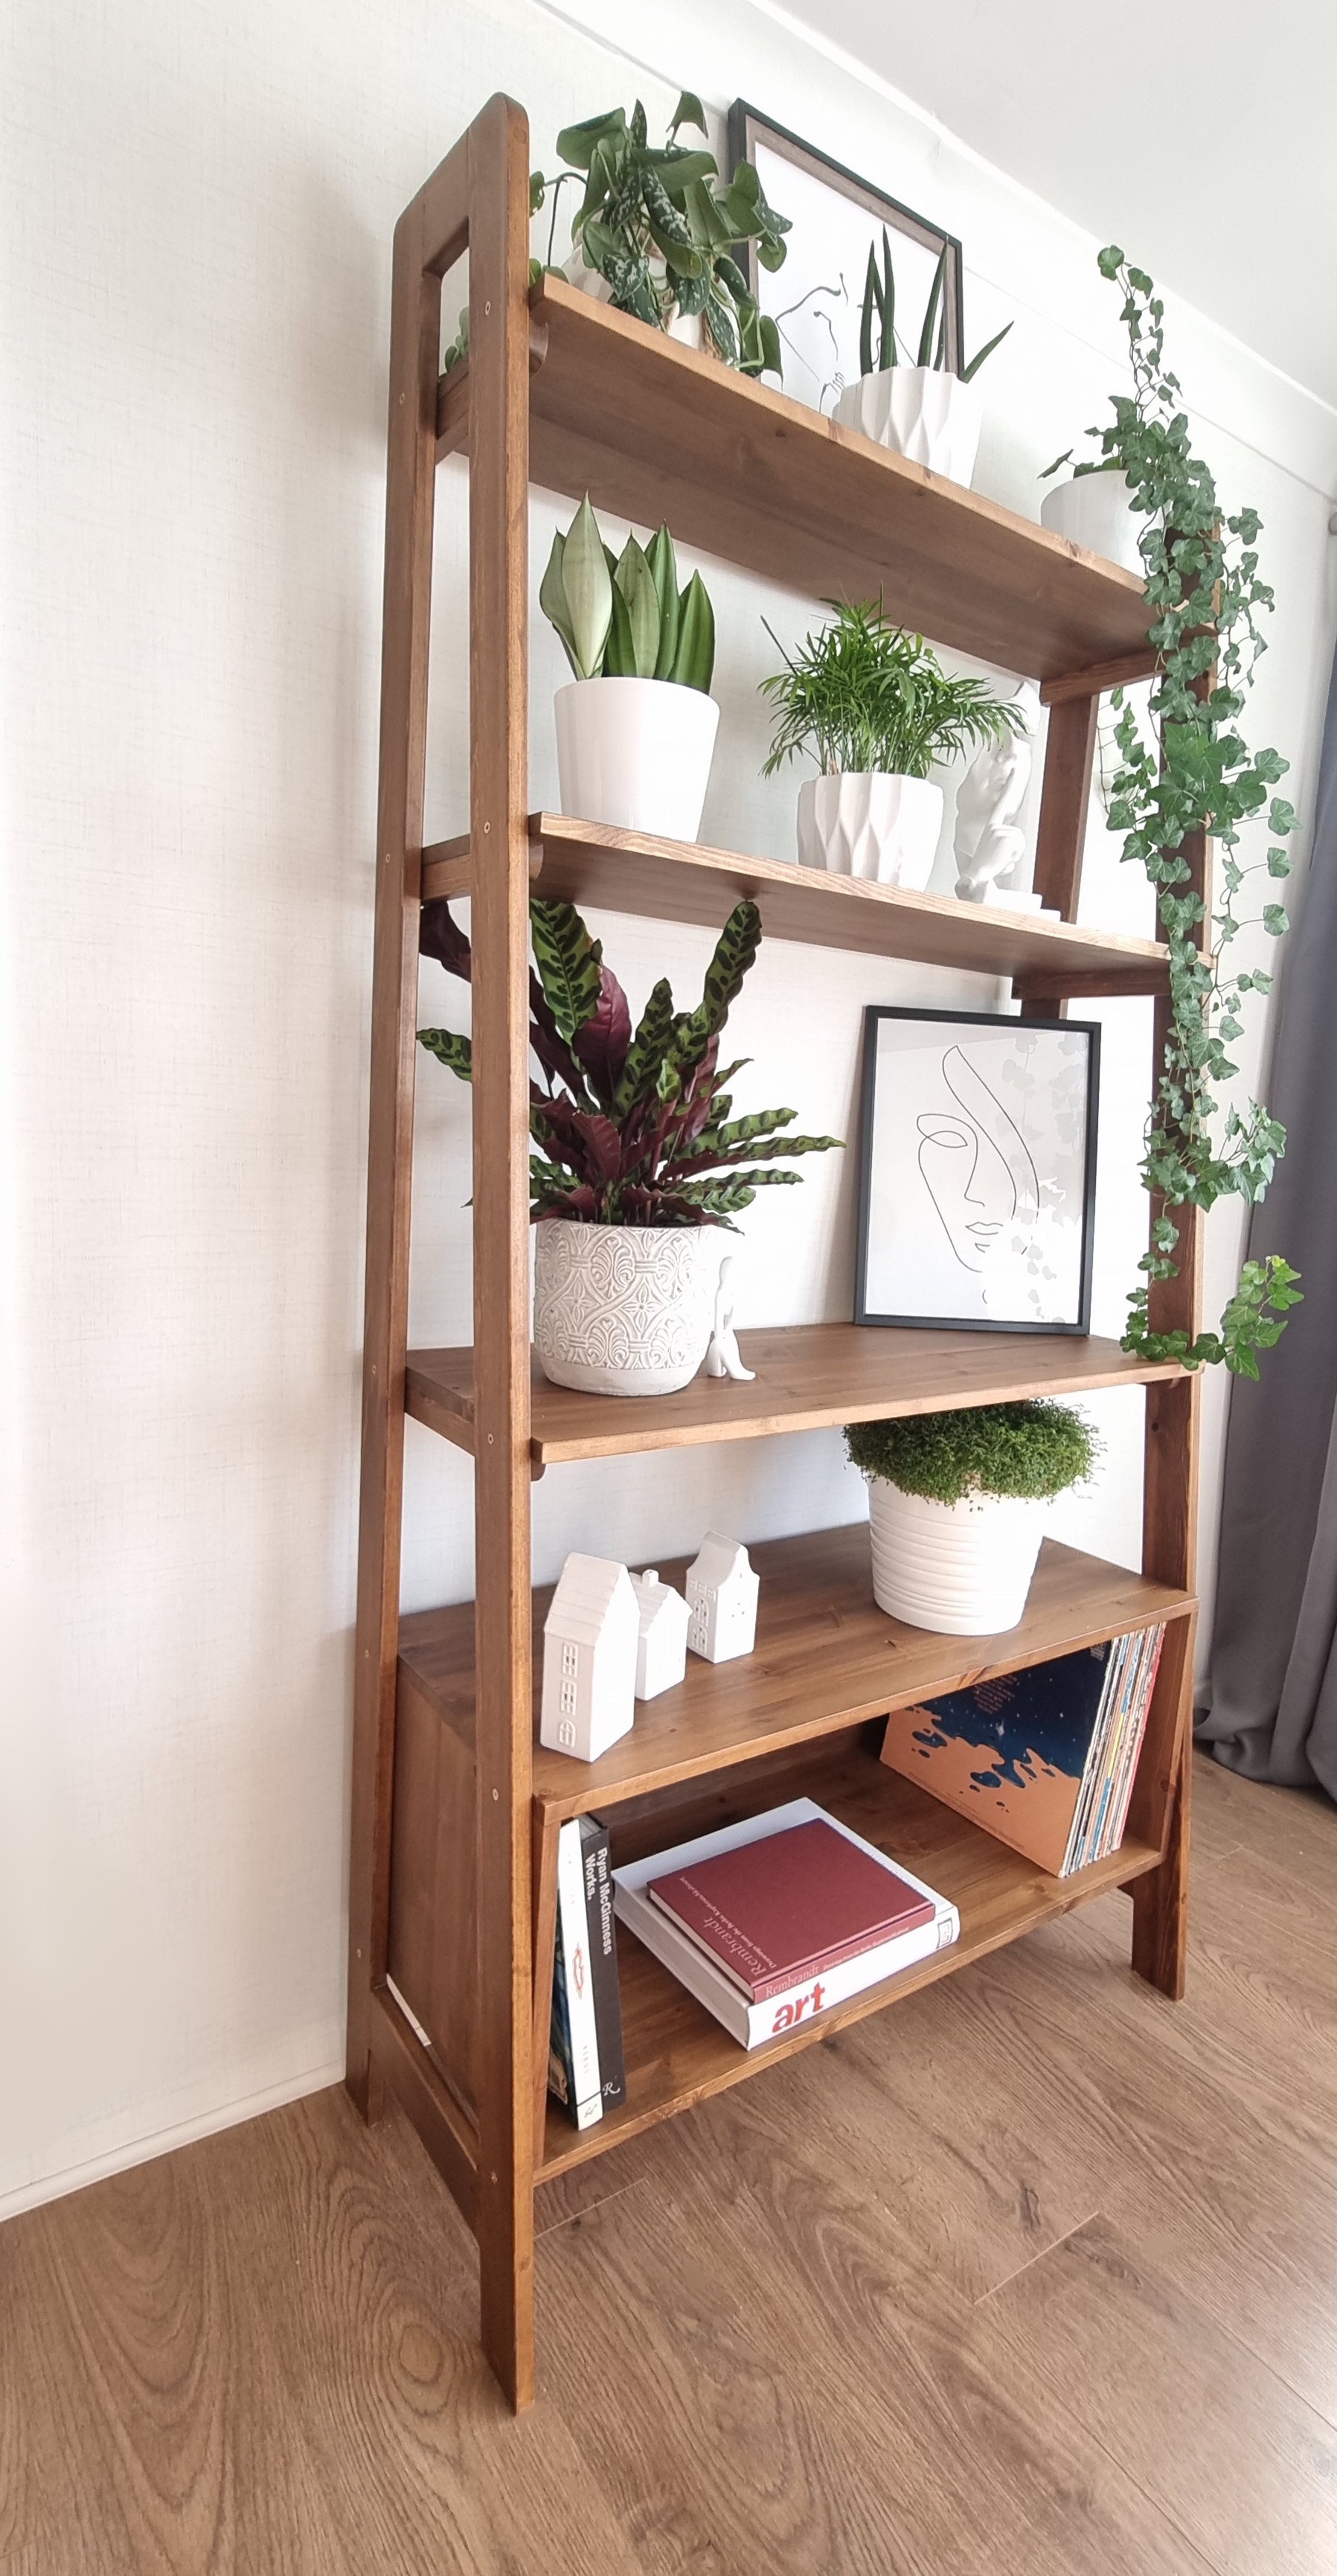 Wooden Free Standing Shelving, Mid-Century Shelving, Unit with Storage Space